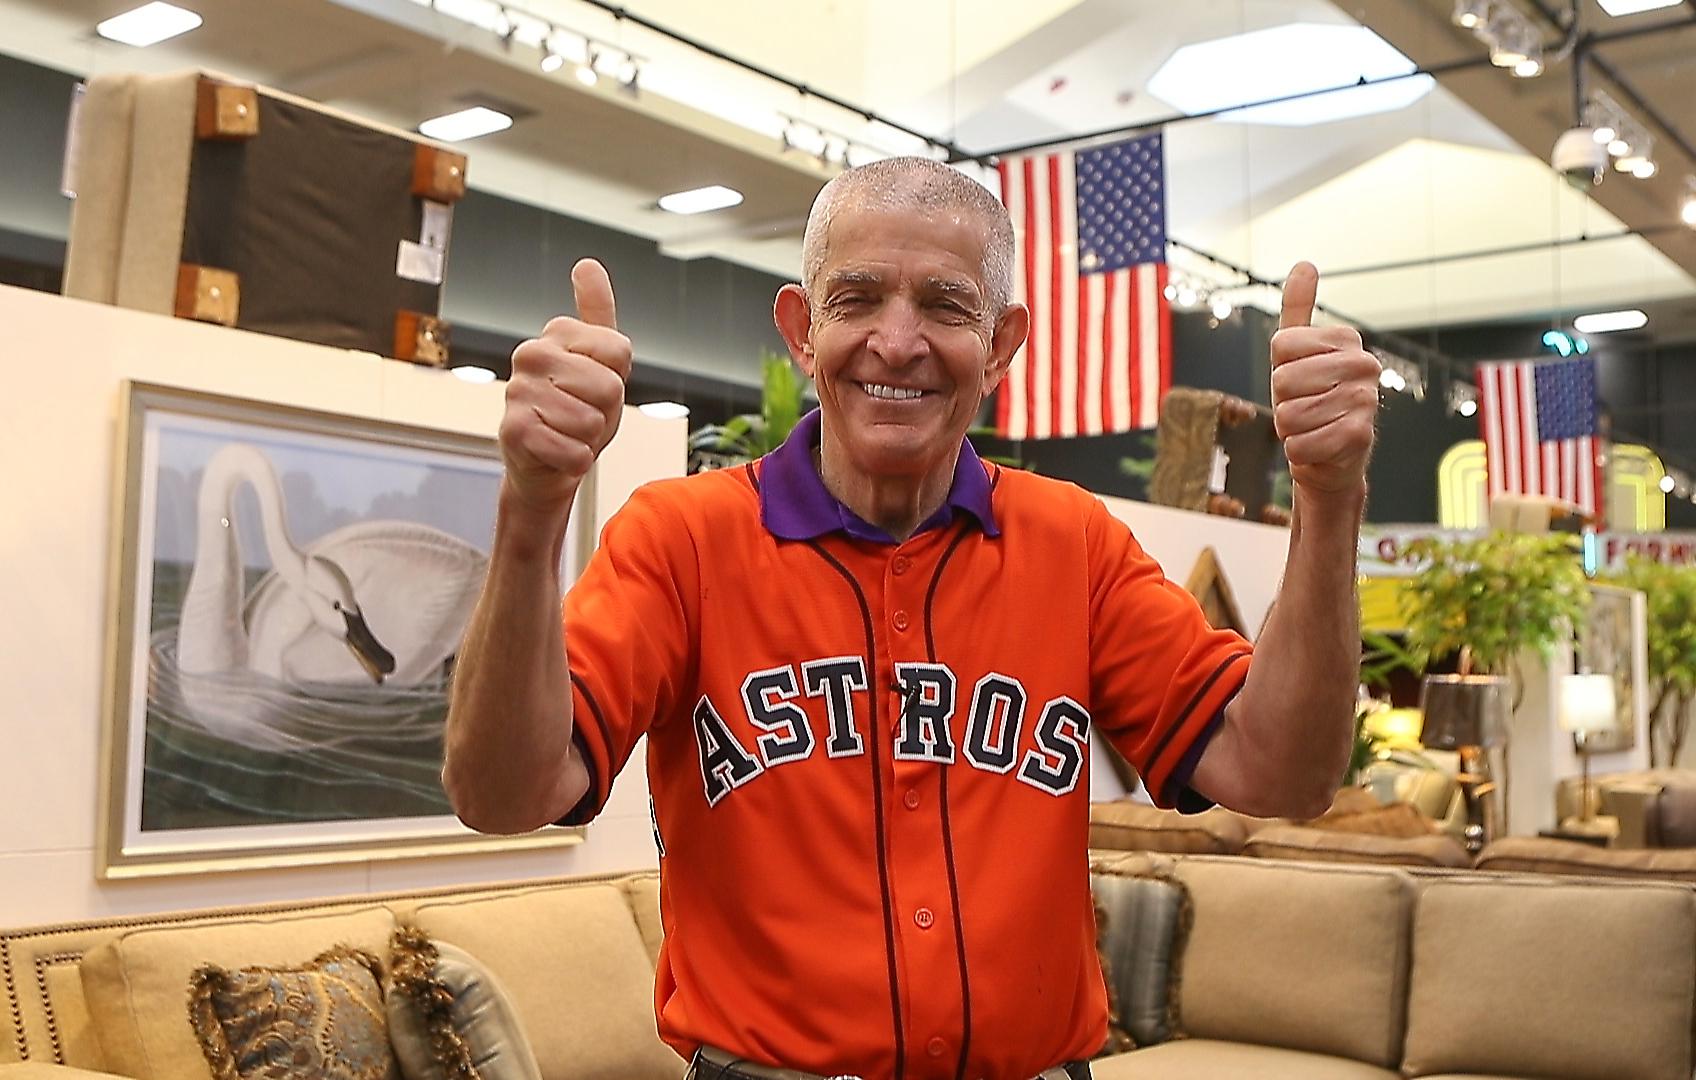 Mattress Mack provides Houston families in need with clothes